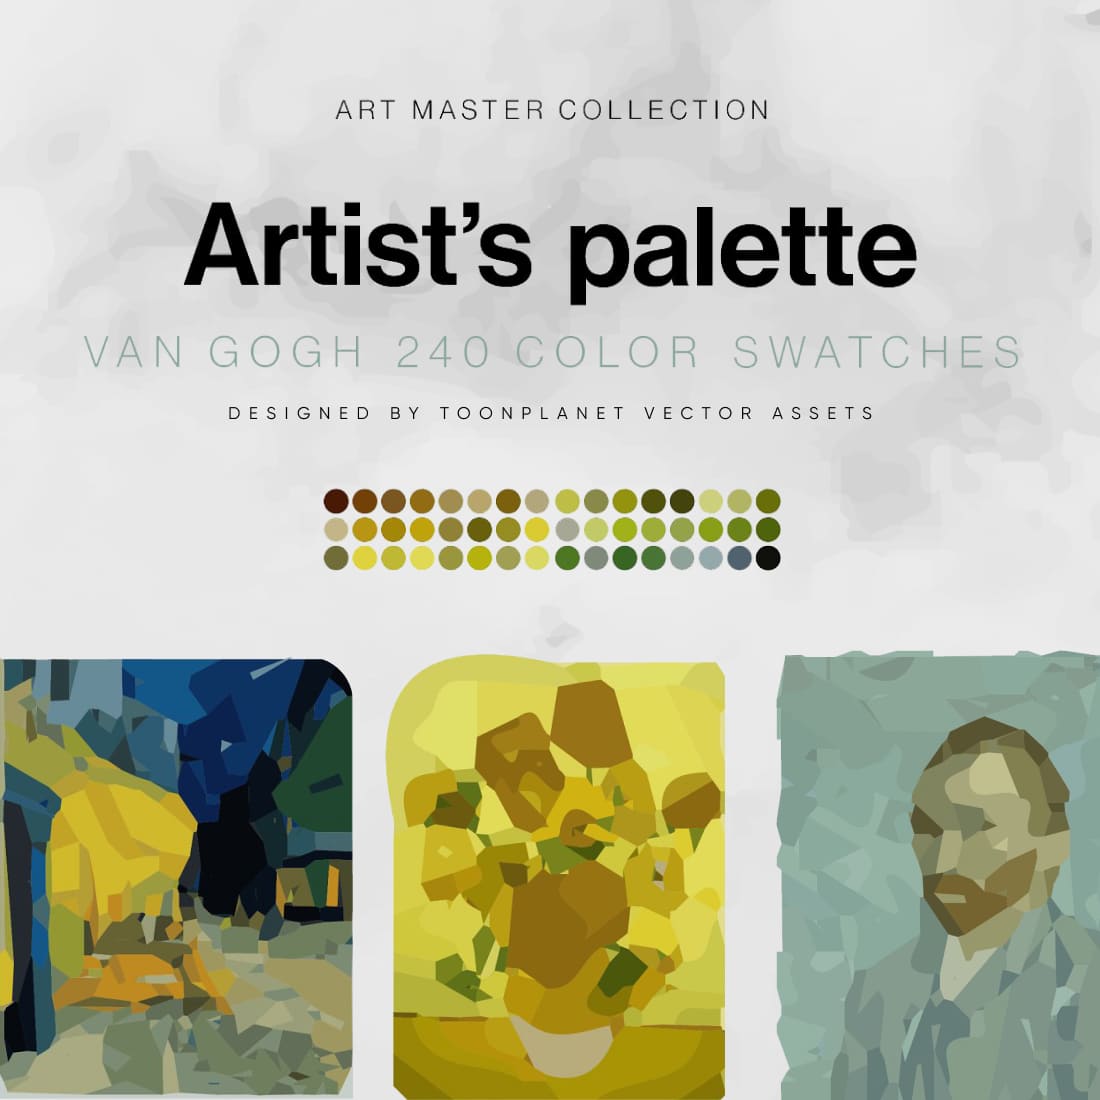 van gogh 240 color swatches palette cover image.